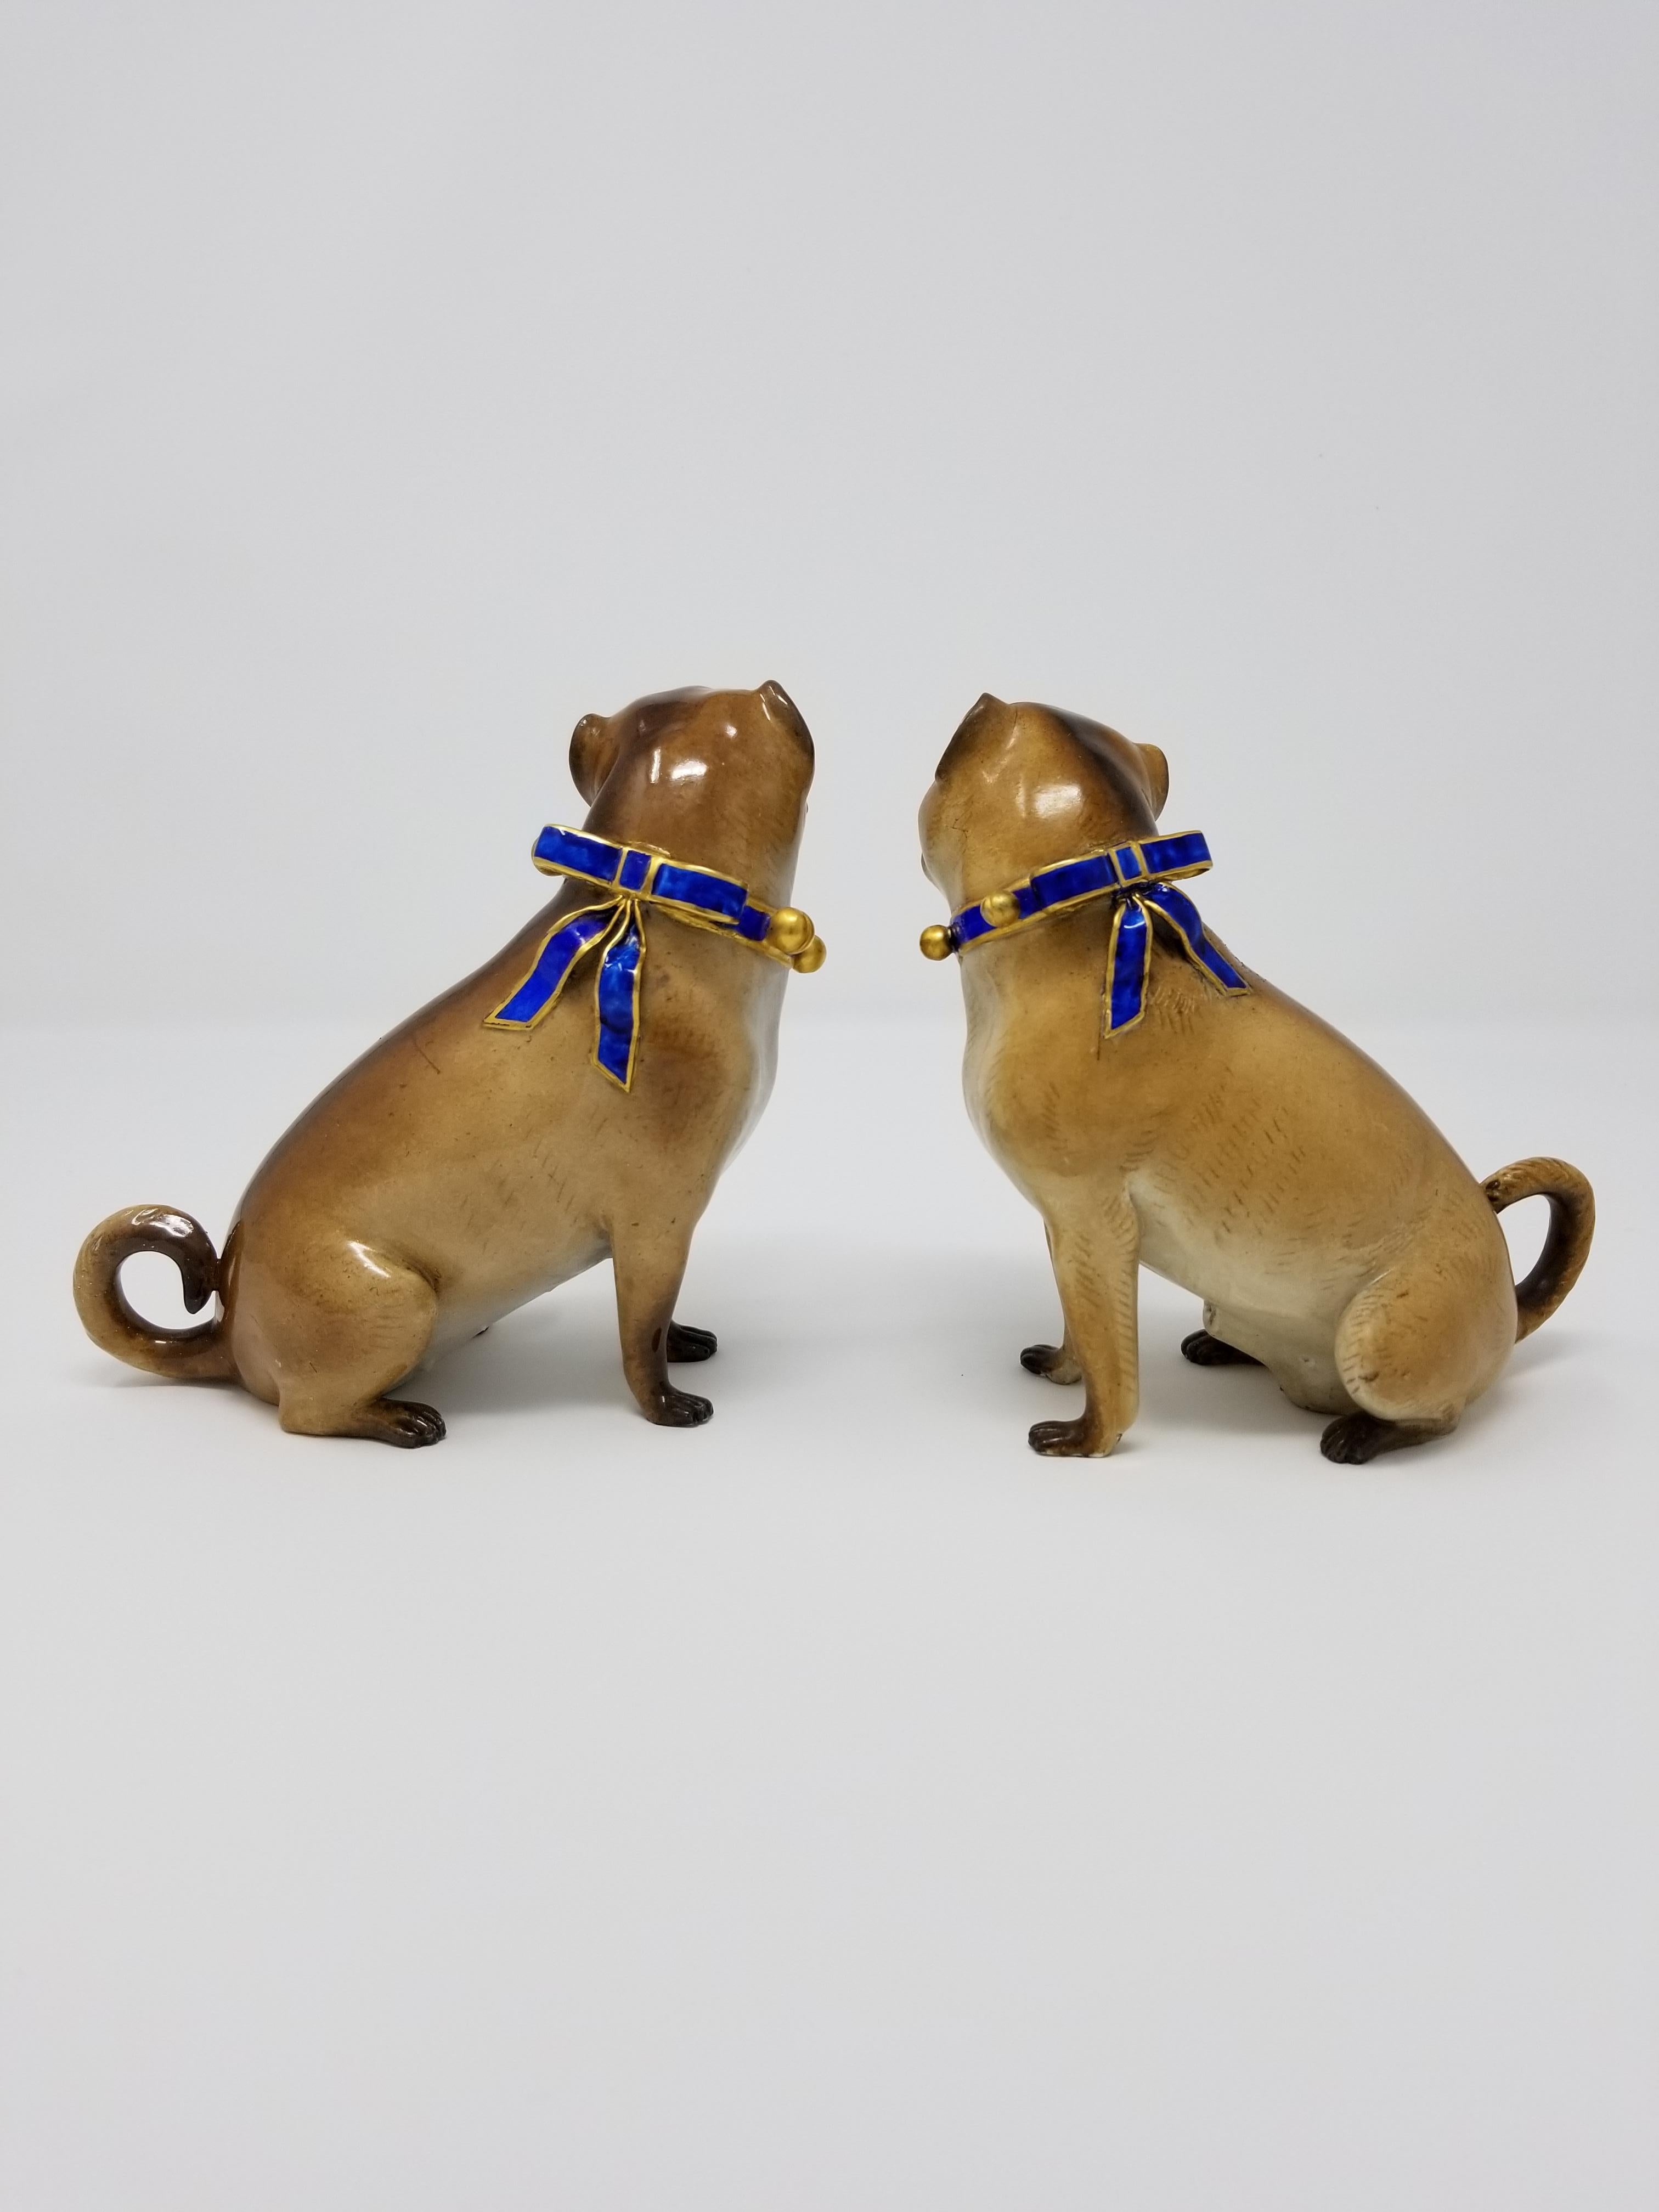 A beautiful pair of 19th century Meissen Porcelain figures of pug dogs with gilt bell collars. Each pug is exceptionally hand-carved and hand-painted to seem as realistic as possible. With a beautiful multi-toned brown overcoat fur and contrasting